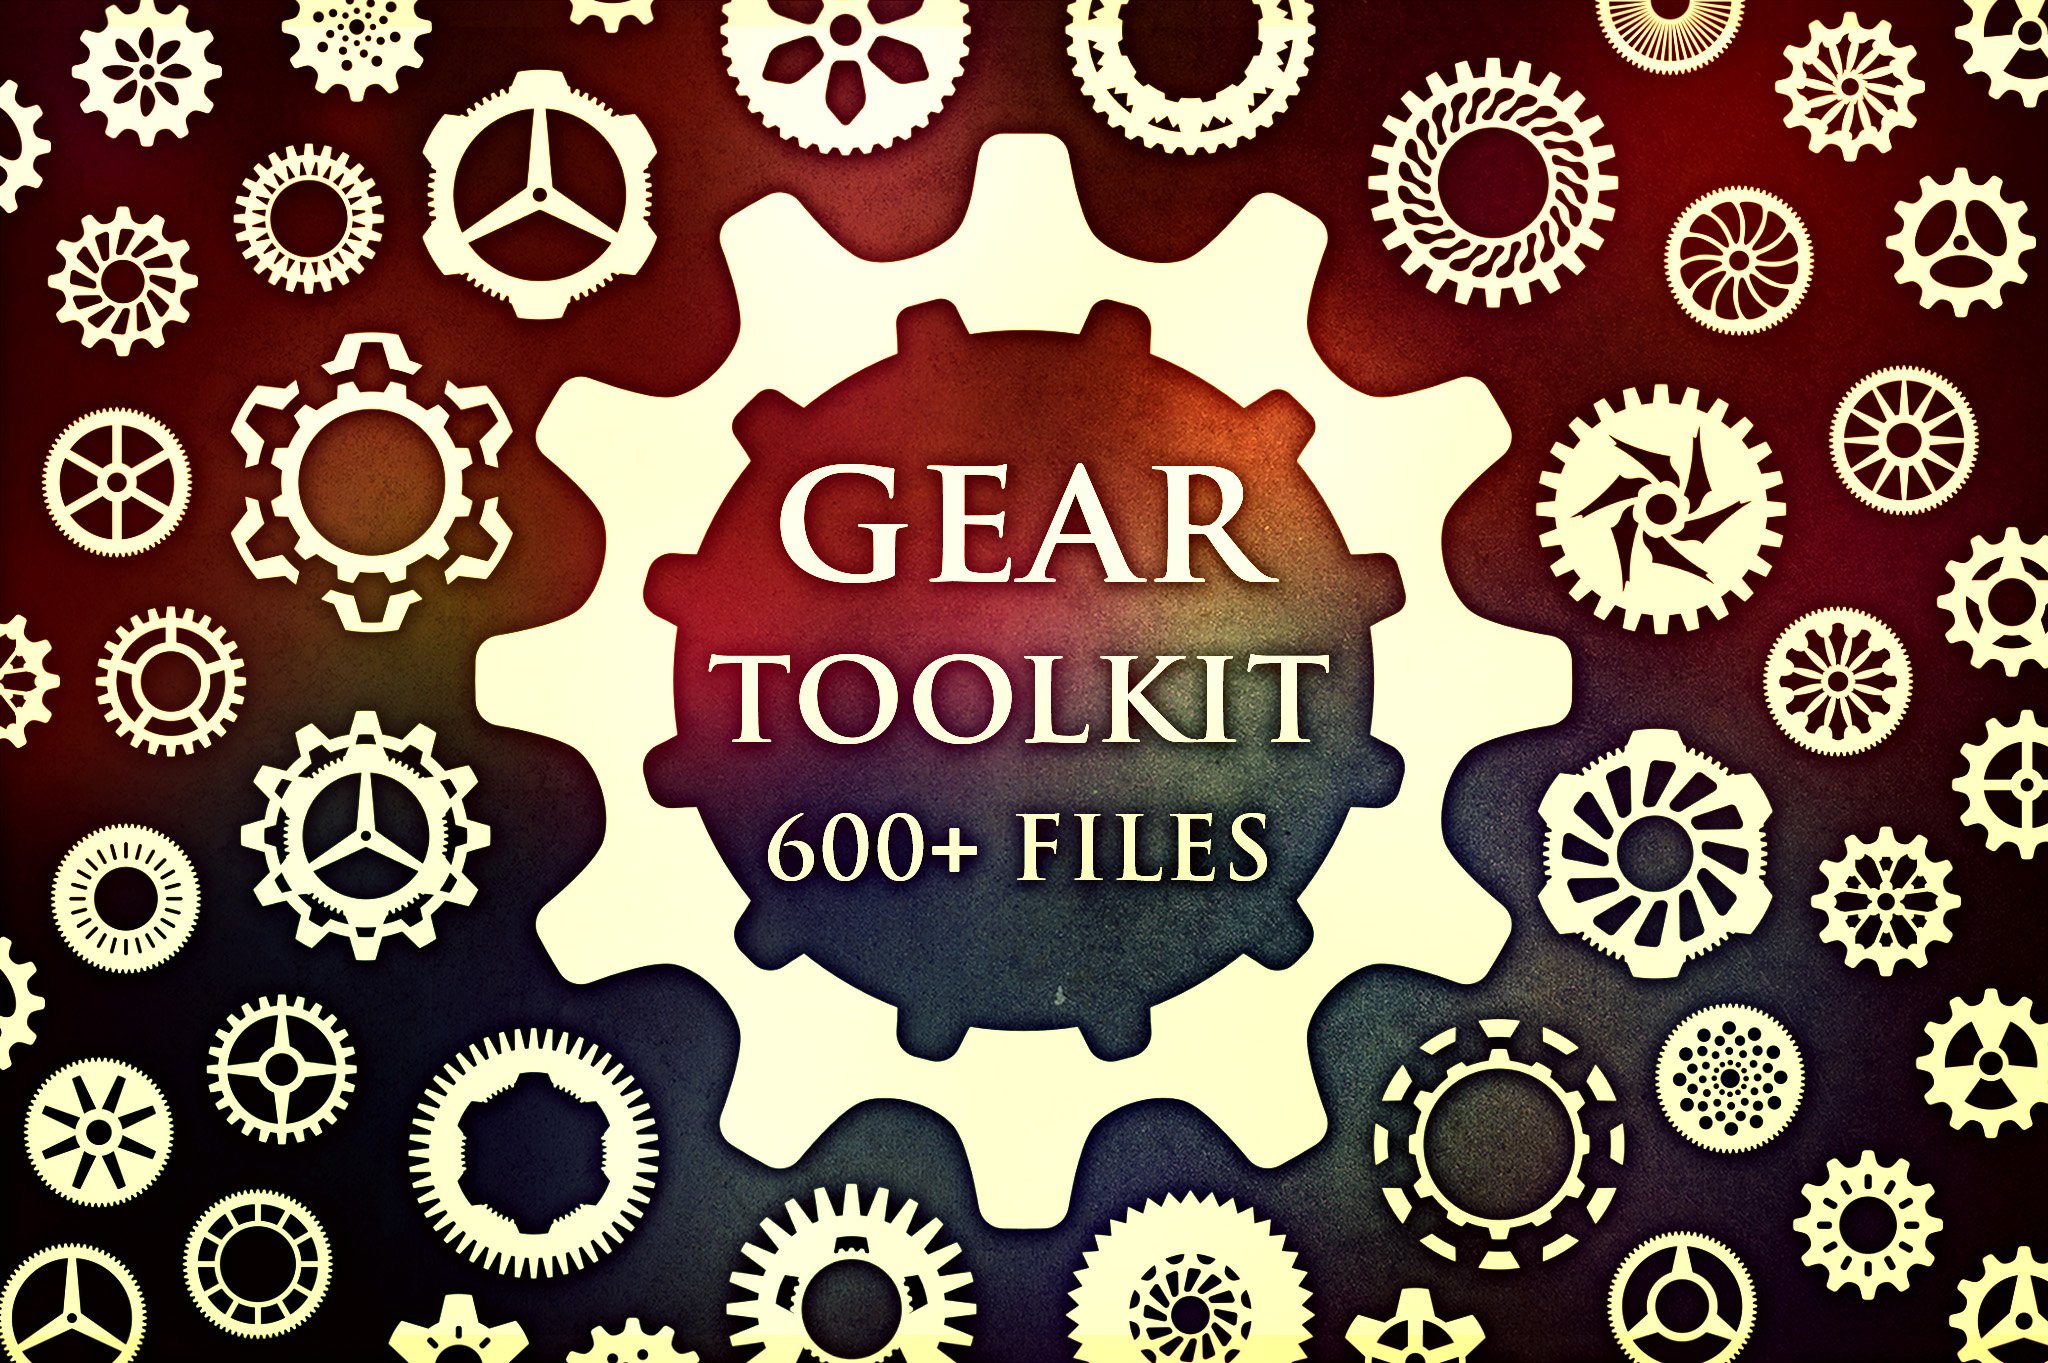 Gear Toolkit(Brushes, JPG, PNG, SVG)cover image.